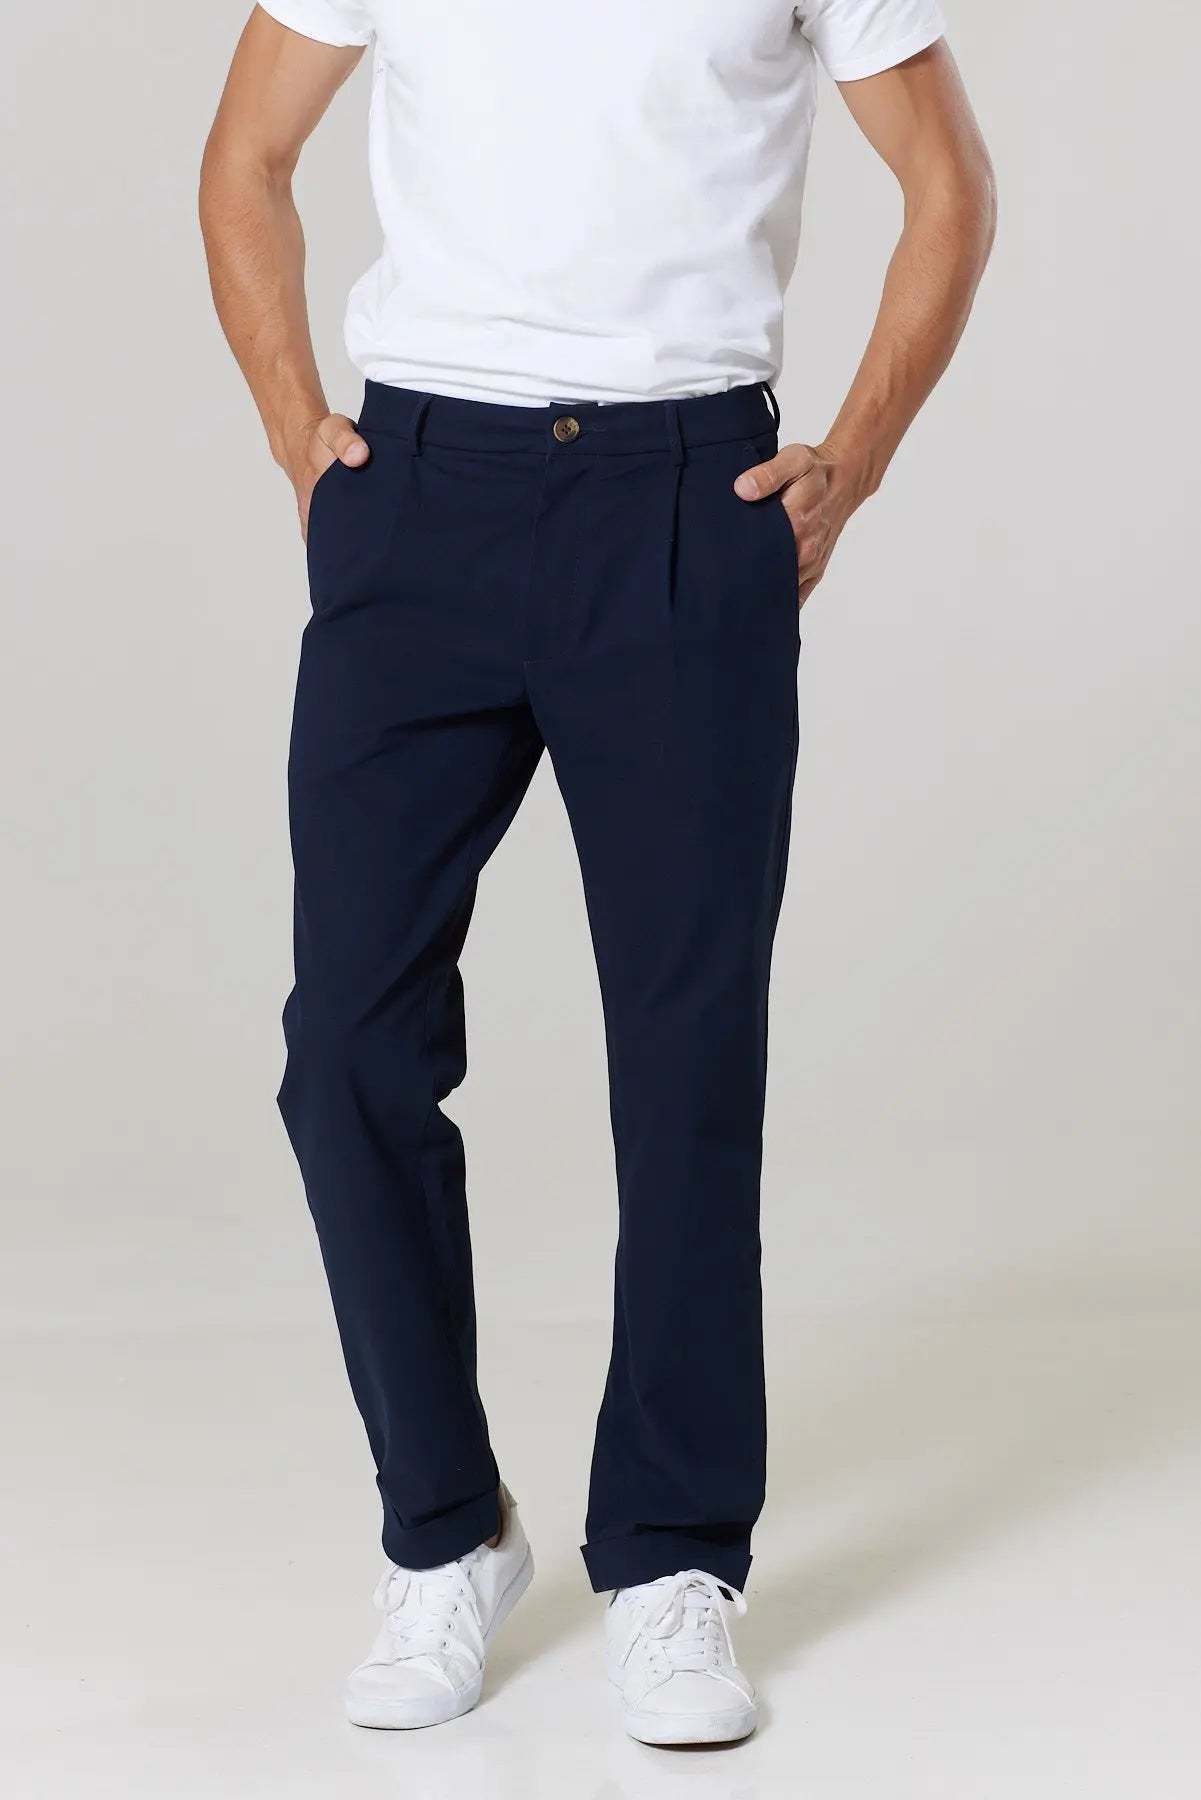 Crispin Trousers - Navy